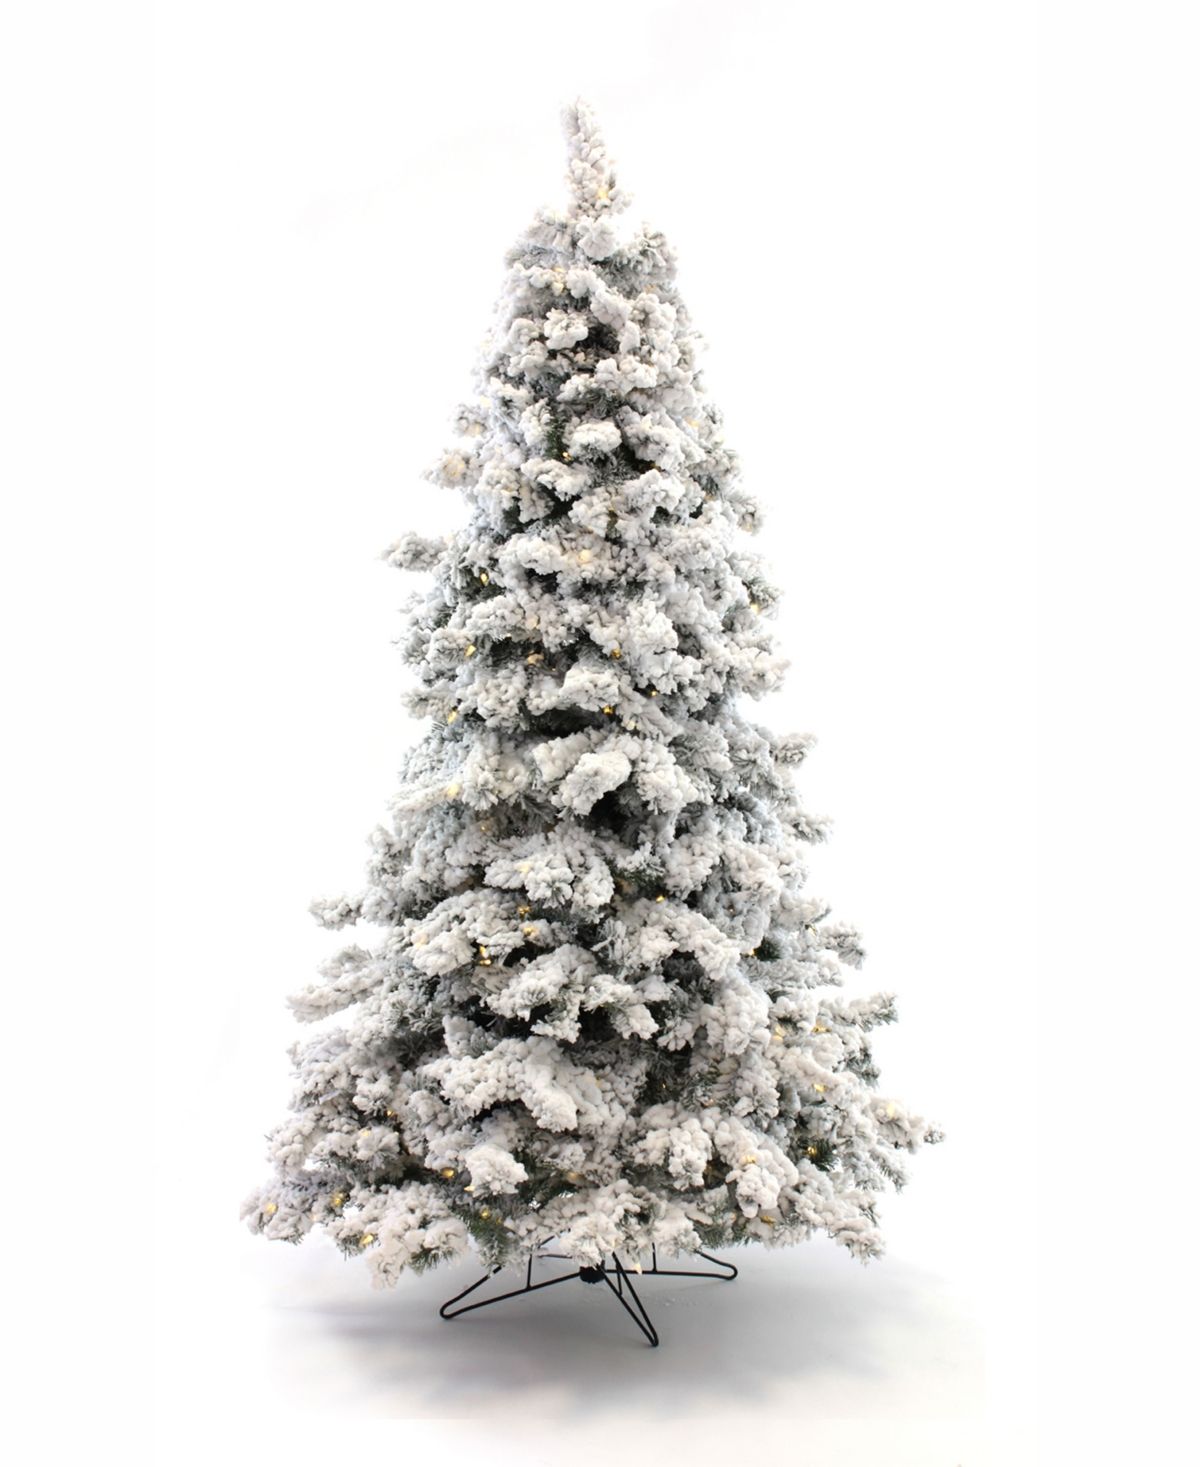 Perfect Holiday 5' Pre-Lit Flocked Christmas Tree with Warm White Led Lights | Macys (US)